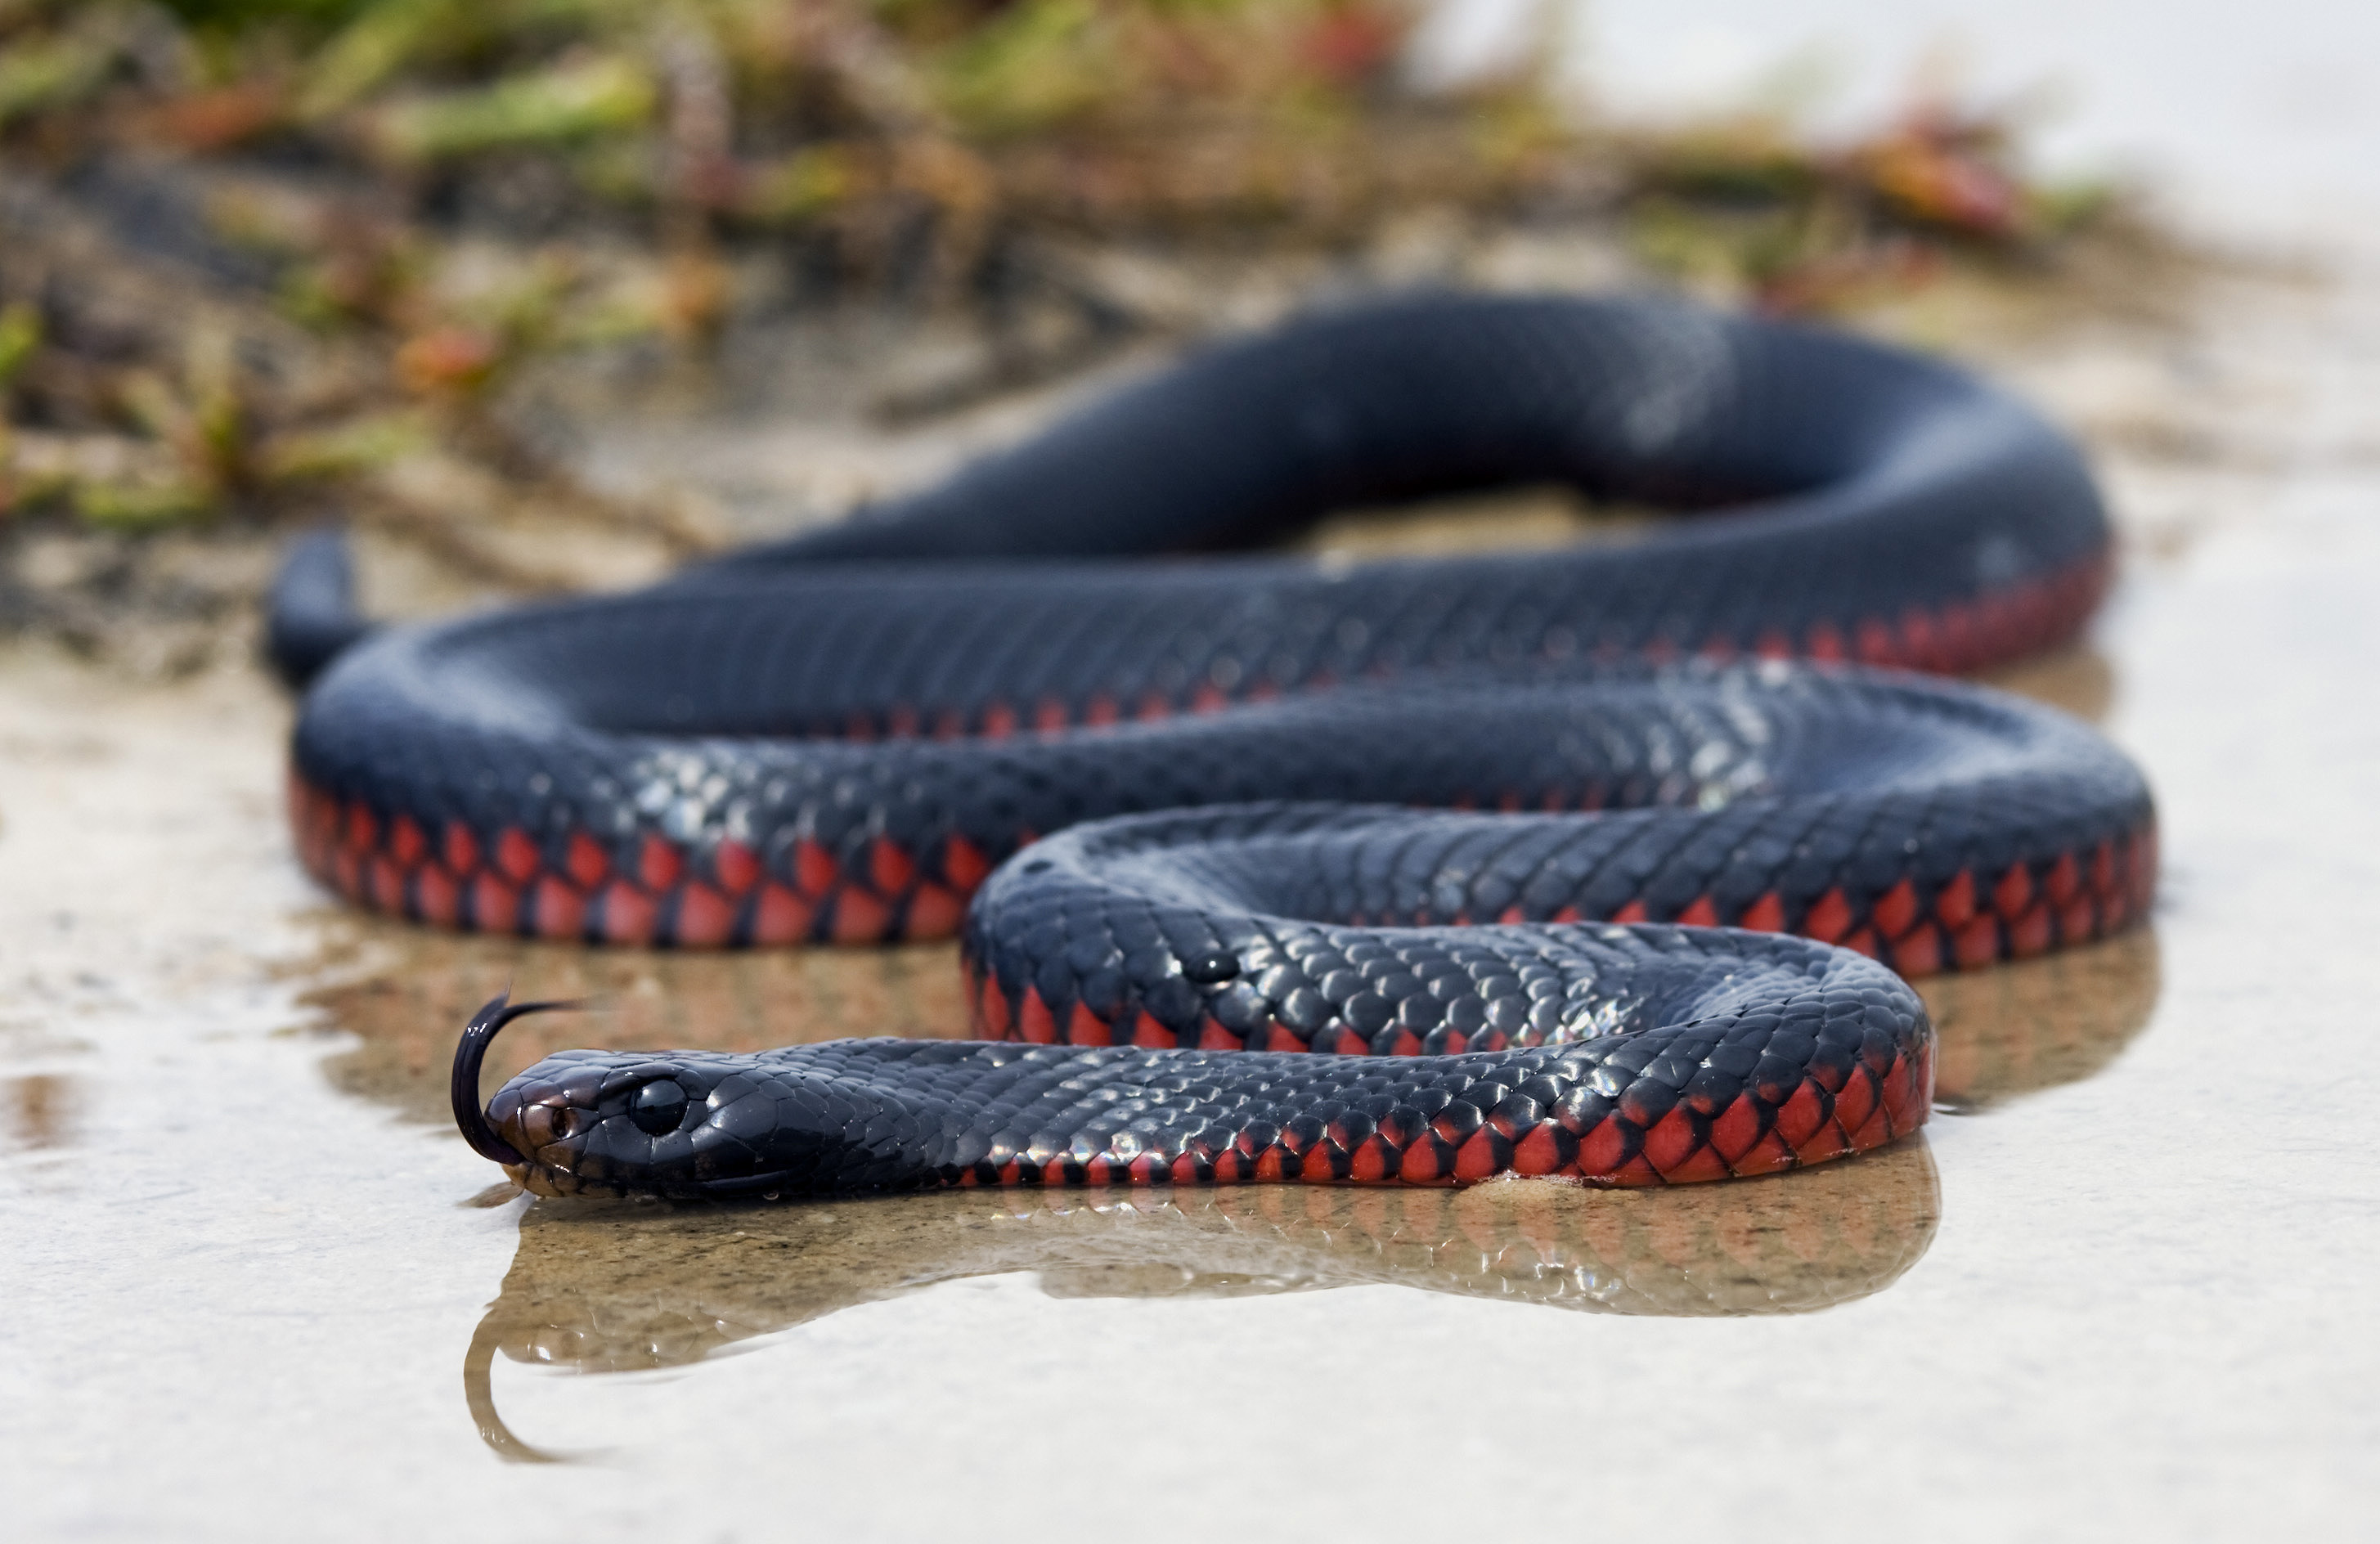 Red-bellied Black Snake Pics, Animal Collection